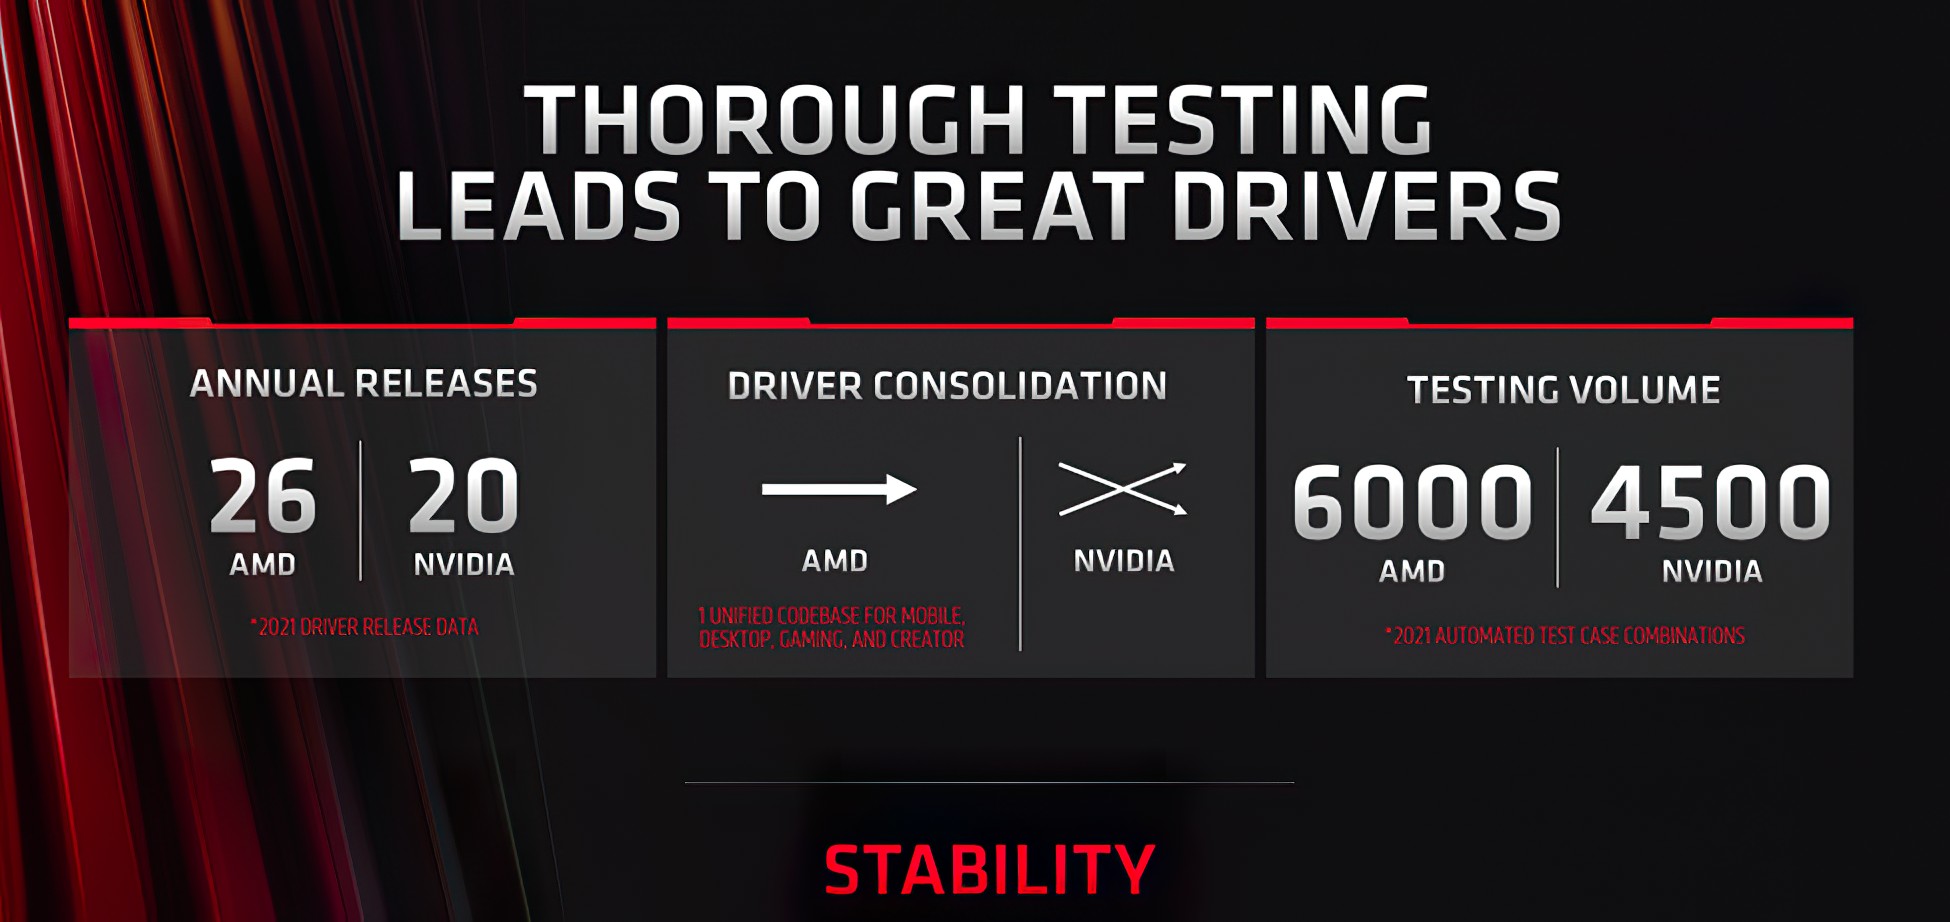 AMD has rebuilt its DirectX11 driver from the ground up, 10 better